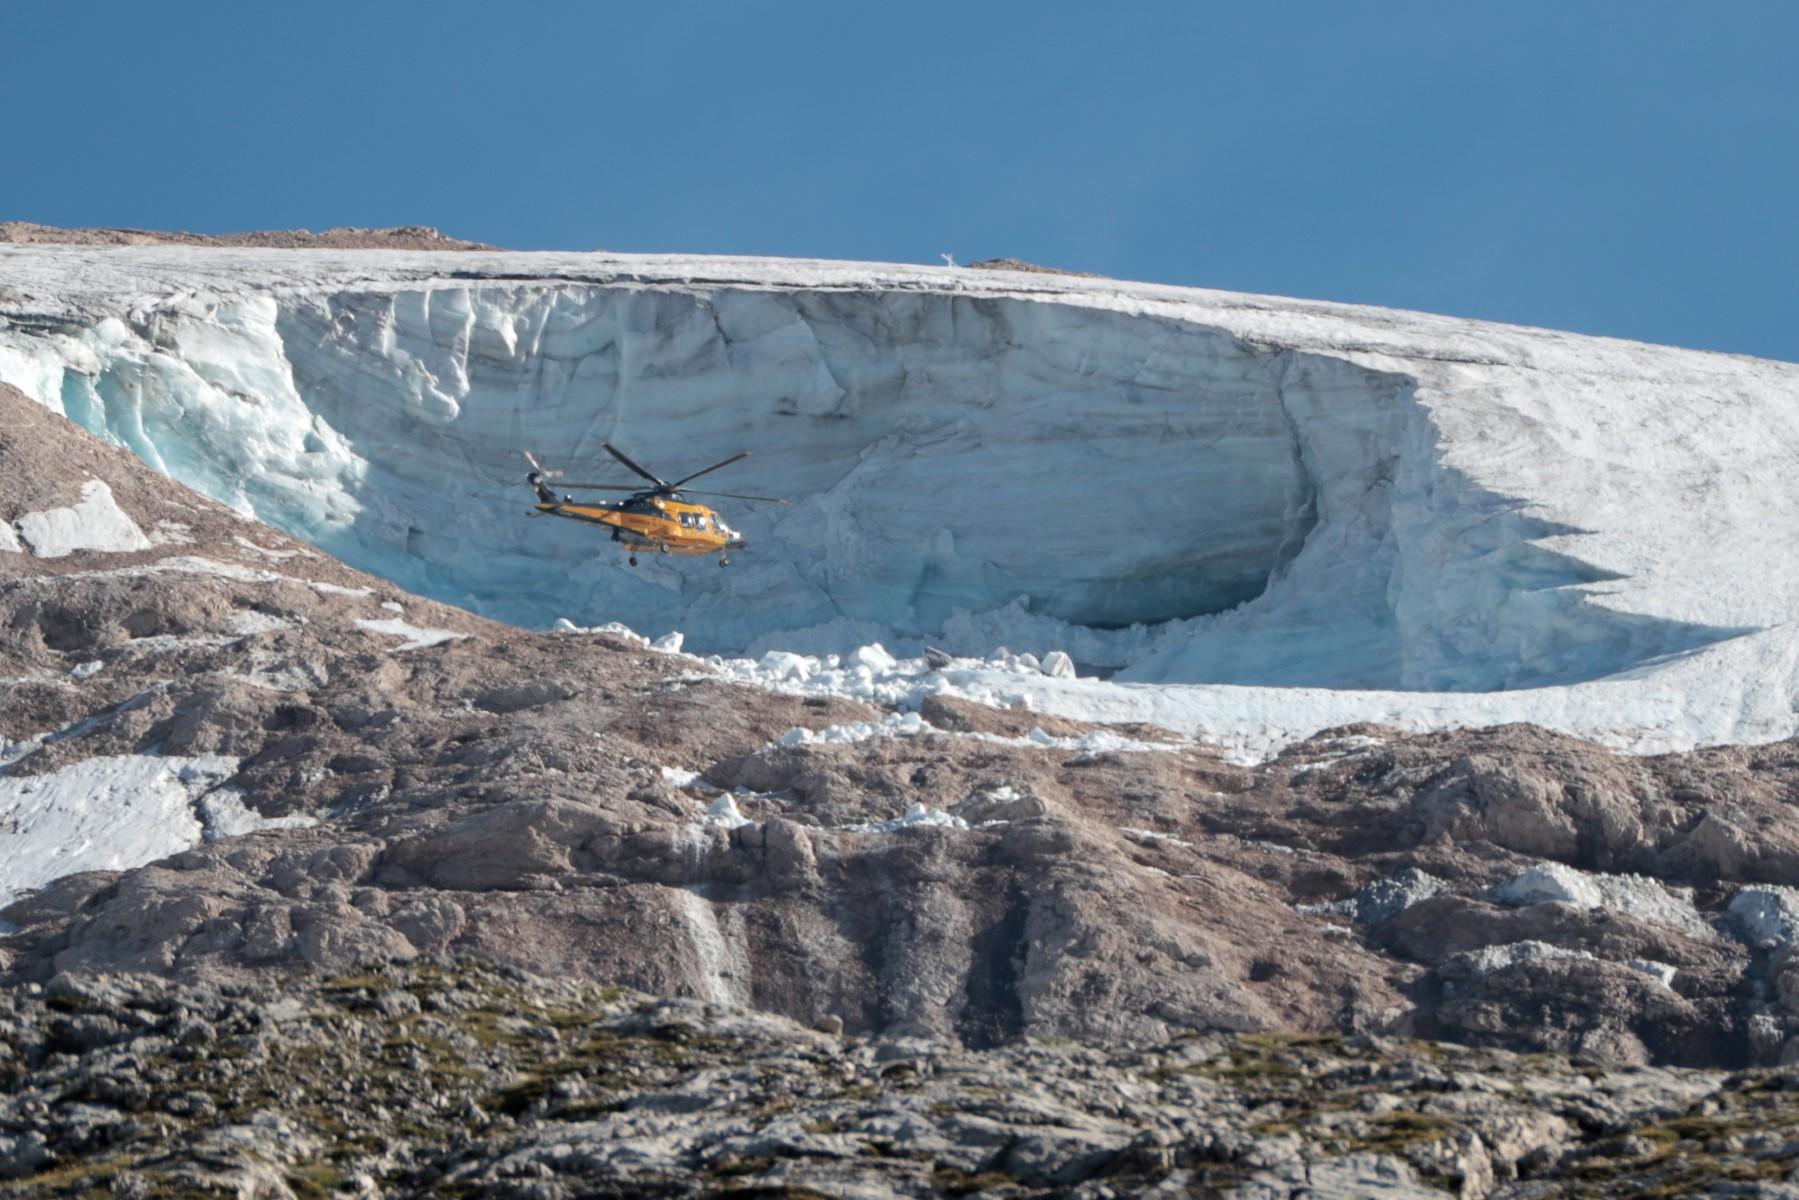 A 'Guardia di Finanzia' helicopter flies above the Marmolada glacier, near Canazei on July 4, one day after an ice serac collapsed, killing seven people. Photo: AFP